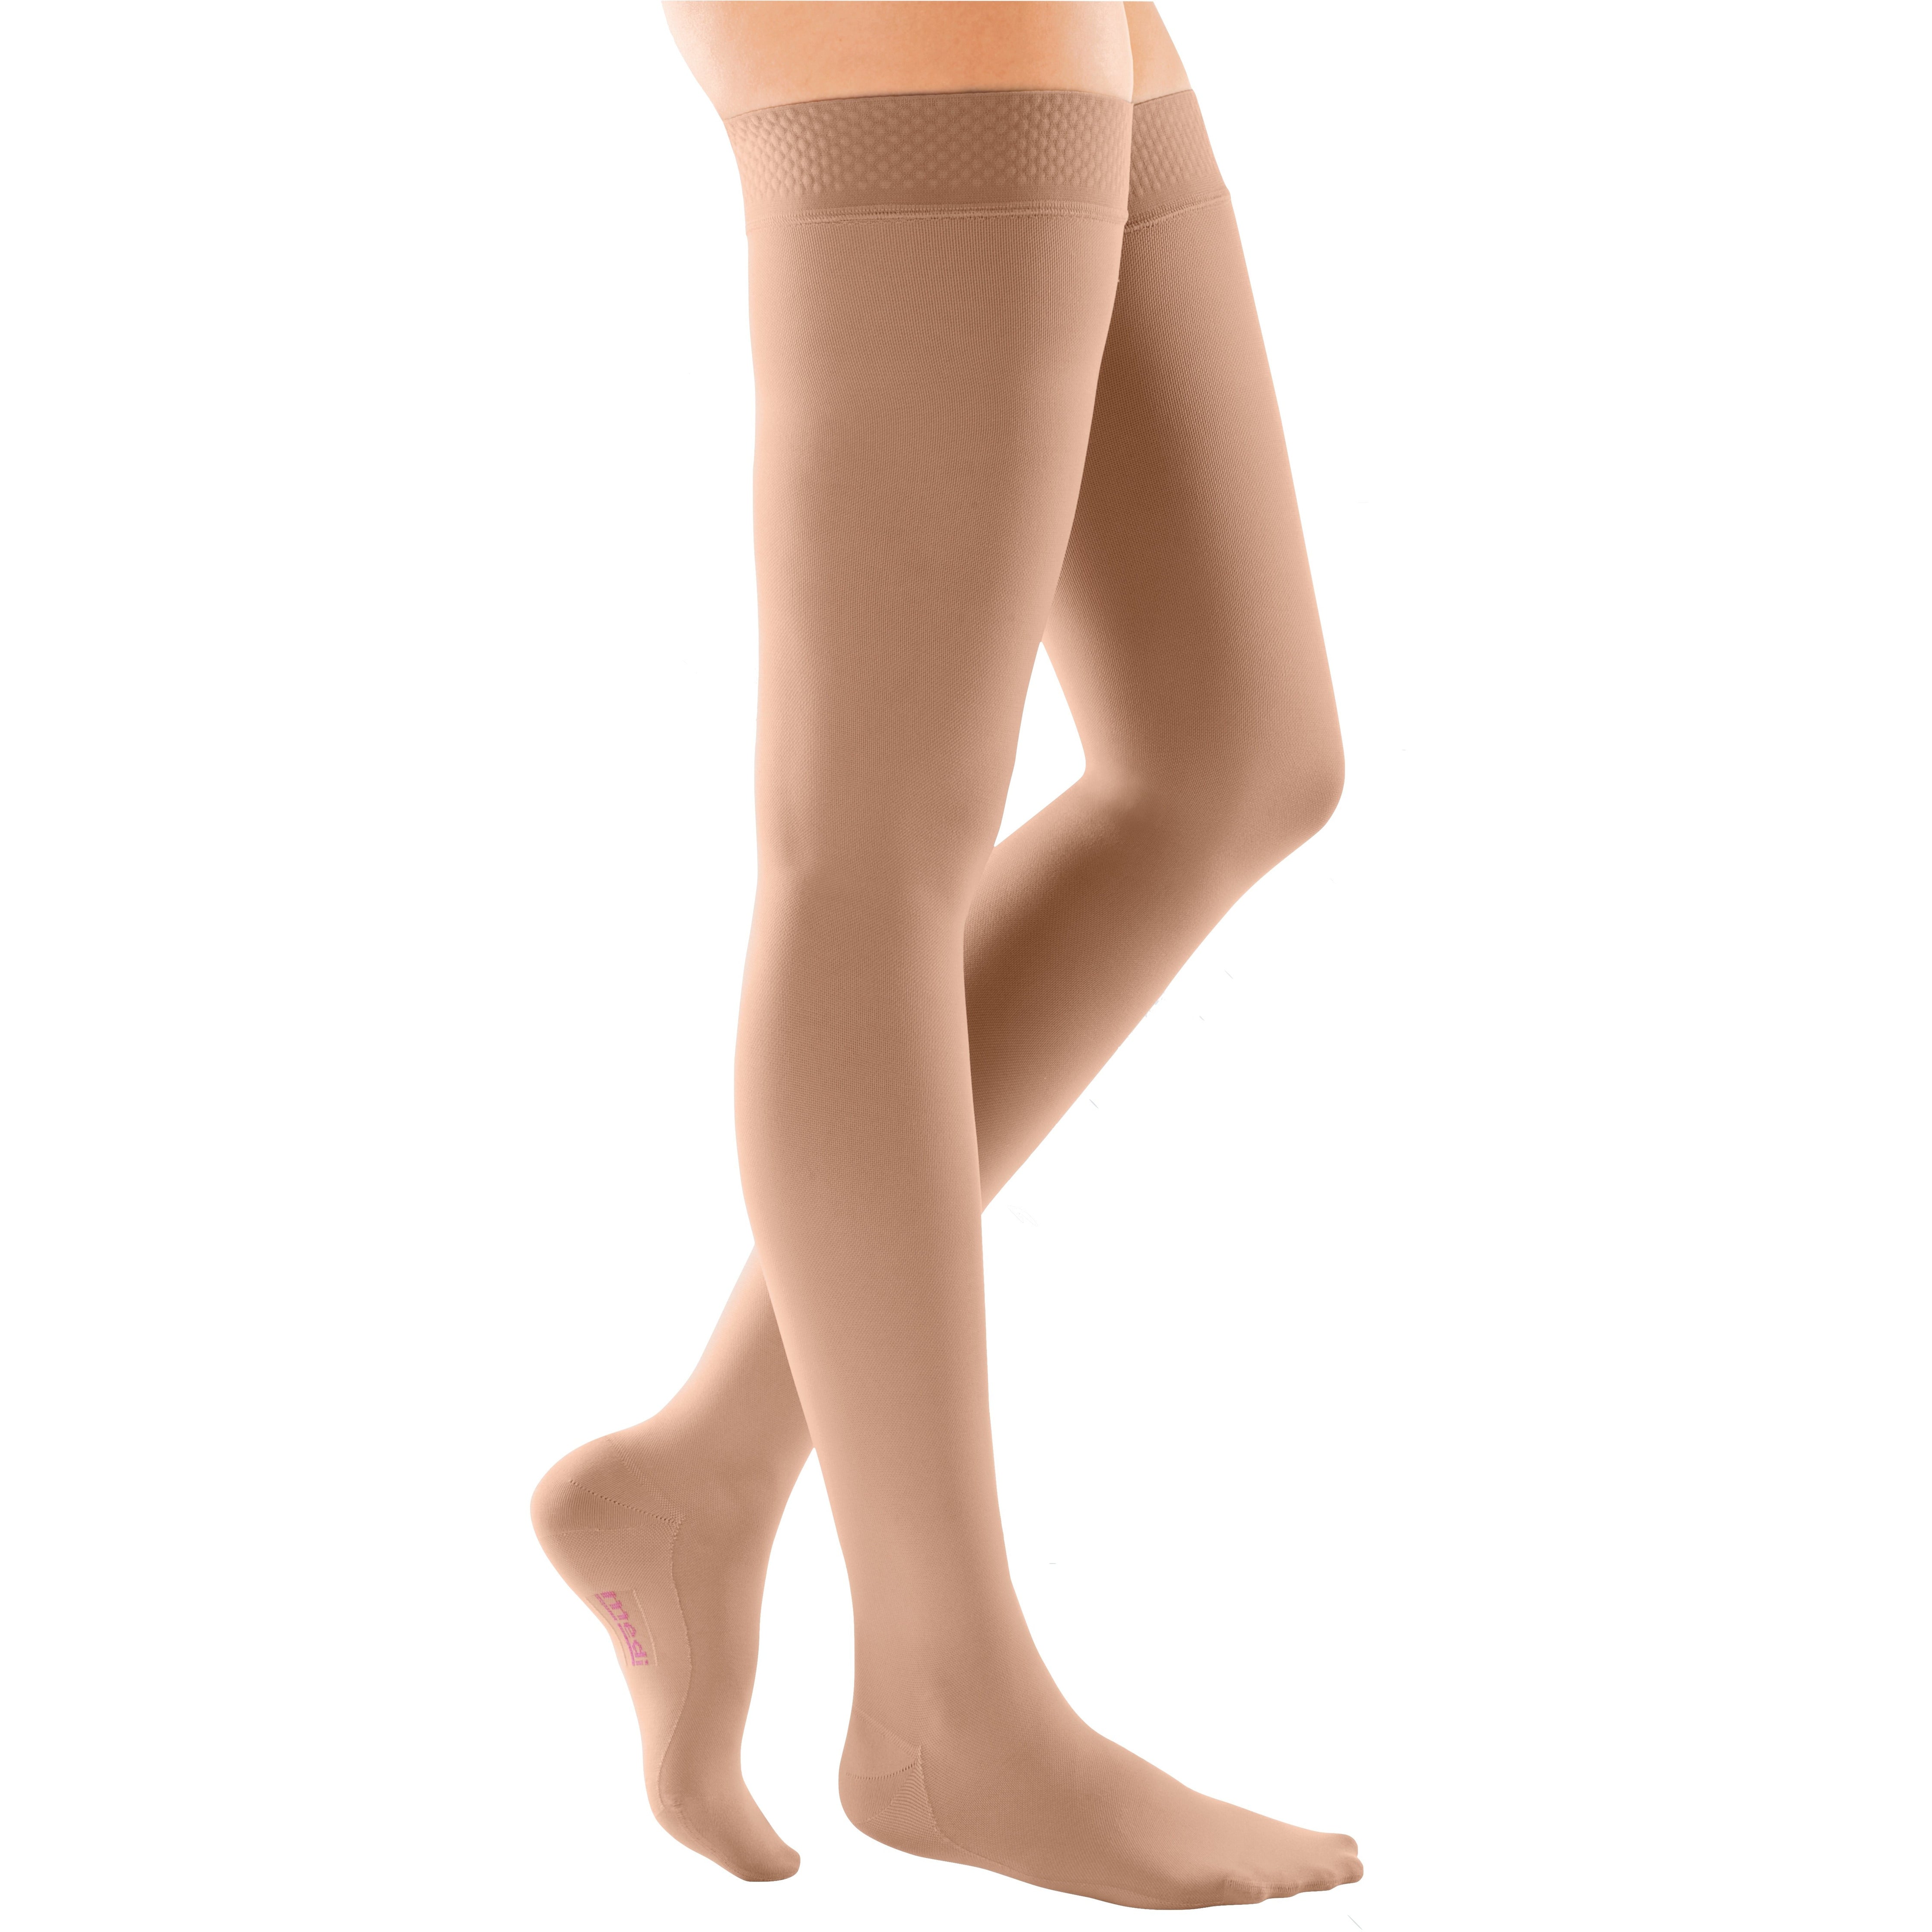 mediven sheer & soft for Women, 20-30 mmHg Thigh High w/Lace